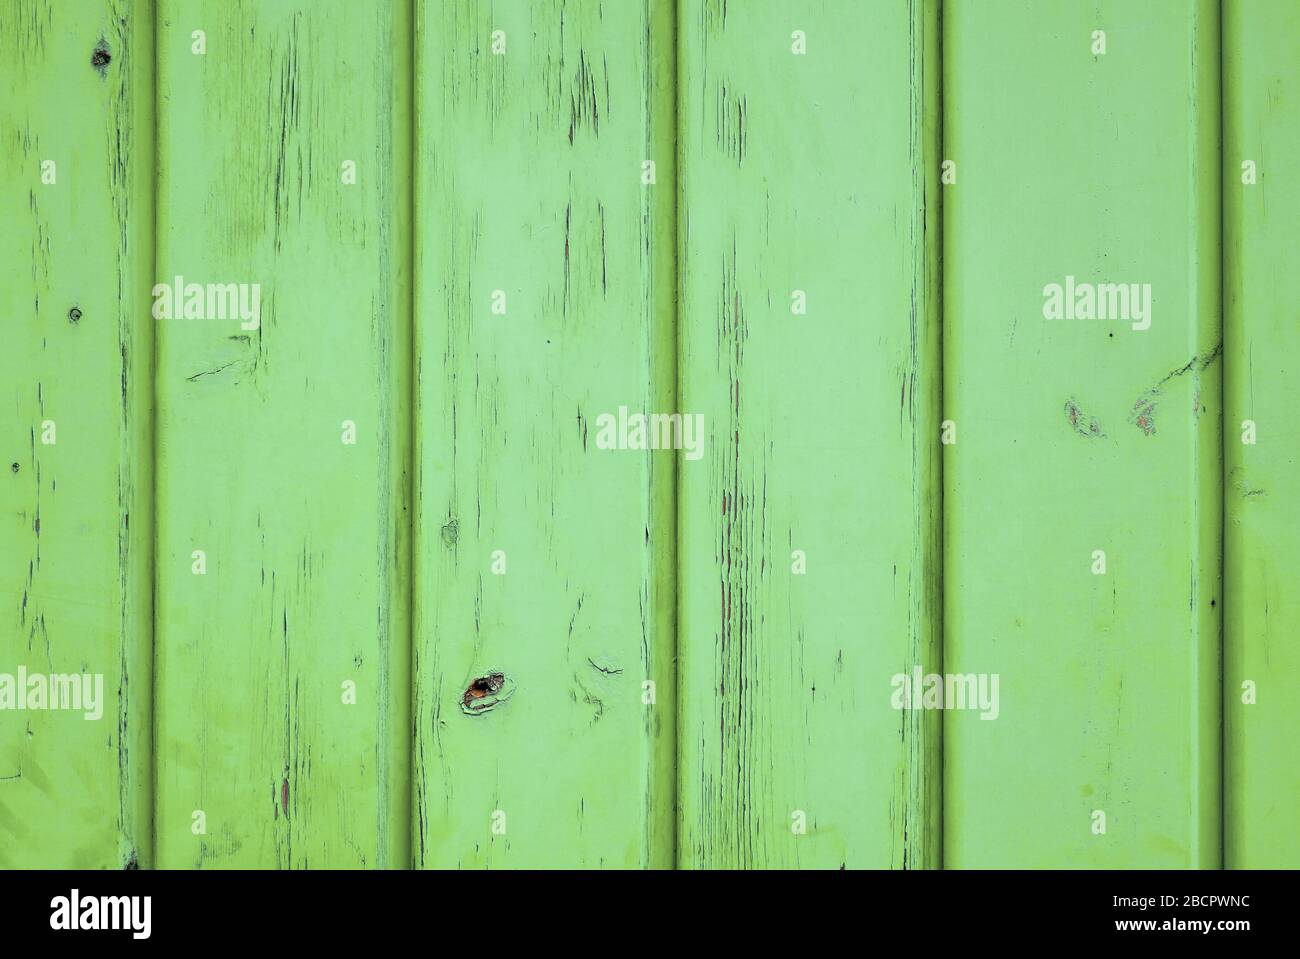 Wooden background of aged vertical planks, cheerful apple green color. Vintage Summer / Spring background. Stock Photo